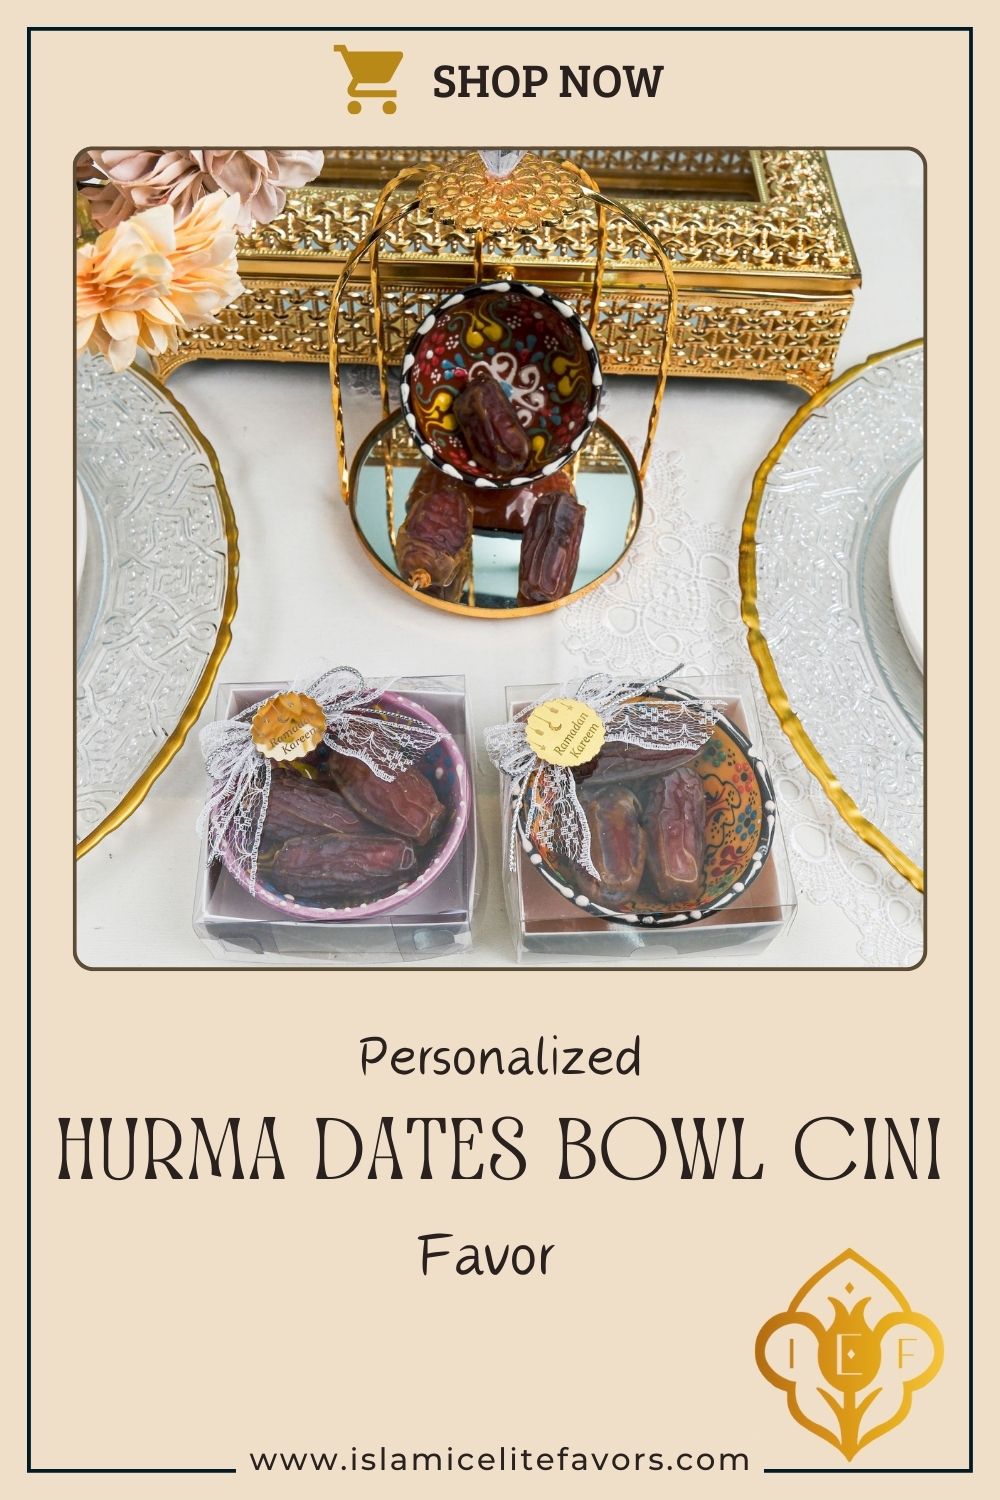 Personalized Hurma Dates in Cini Bowl Favors Ramadan Eid Islamic Gift - Islamic Elite Favors is a handmade gift shop offering a wide variety of unique and personalized gifts for all occasions. Whether you're looking for the perfect Ramadan, Eid, Hajj, wedding gift or something special for a birthday, baby shower or anniversary, we have something for everyone. High quality, made with love.